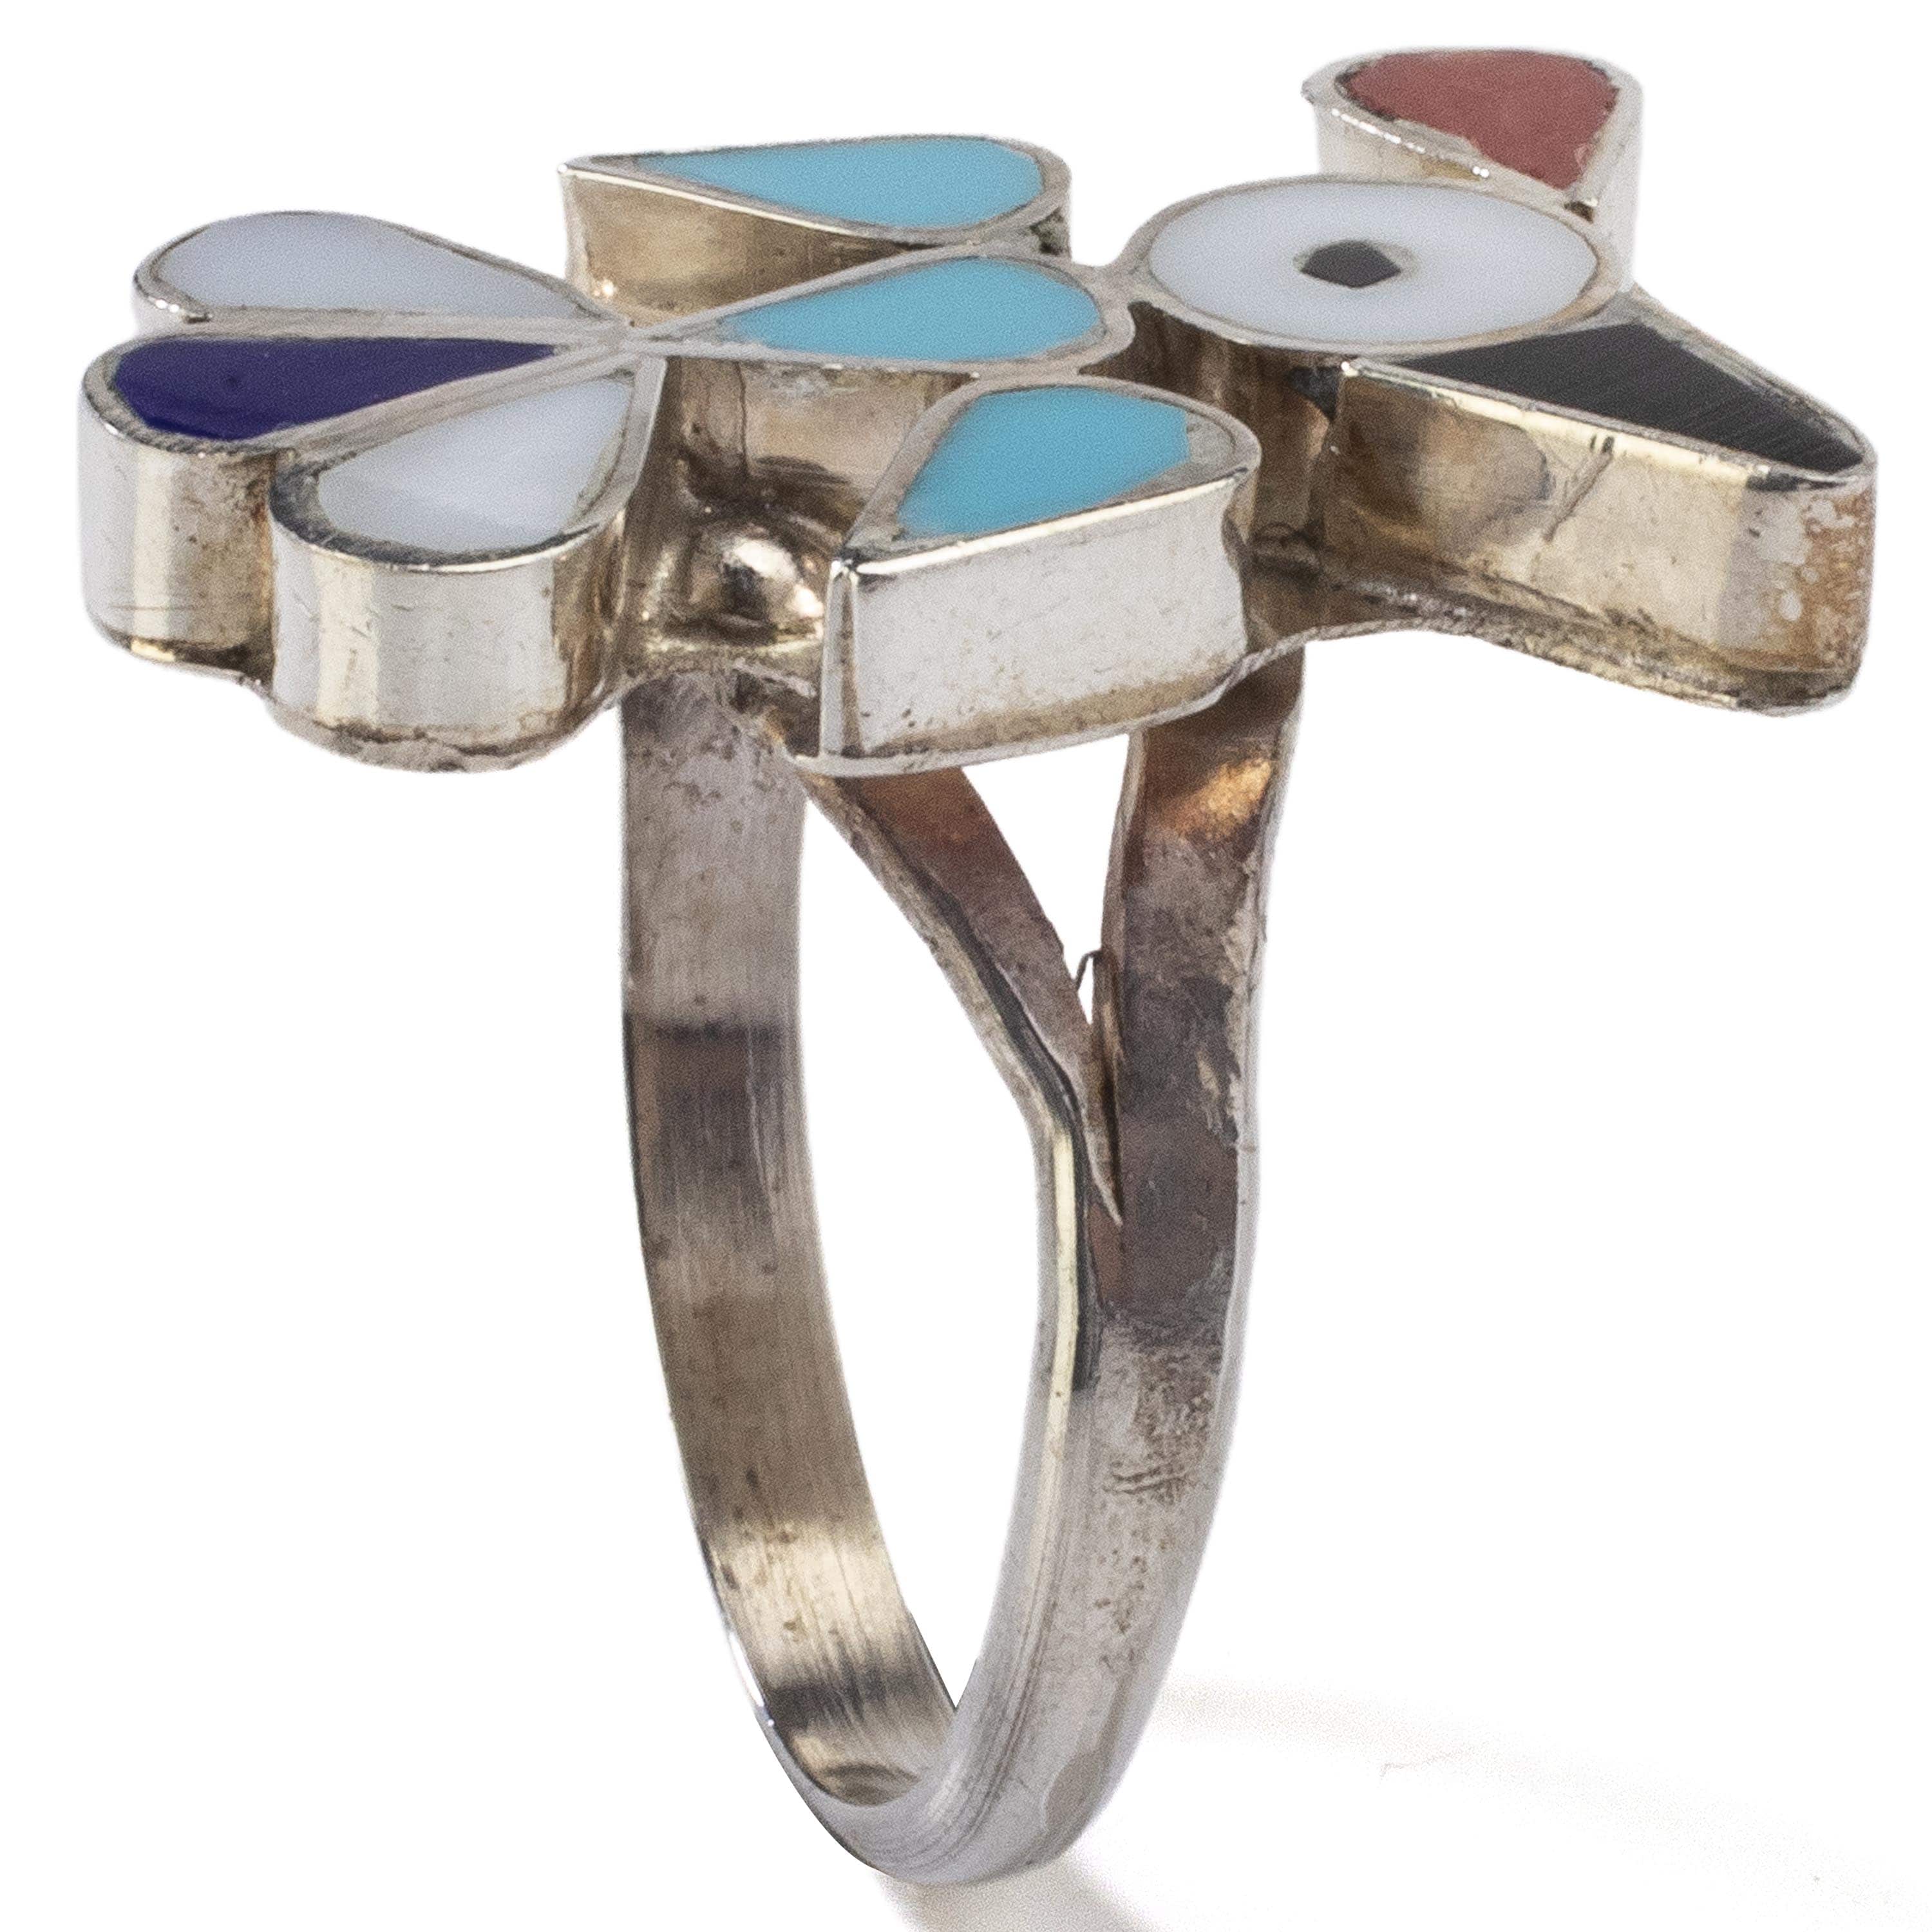 Kalifano Native American Jewelry 6.5 Pino Yunie Zuni Peyote Bird with Mother of Pearl, Black Onyx, Coral, Lapis, and Turquoise USA Native American Made 925 Sterling Silver Ring NAR200.026.65